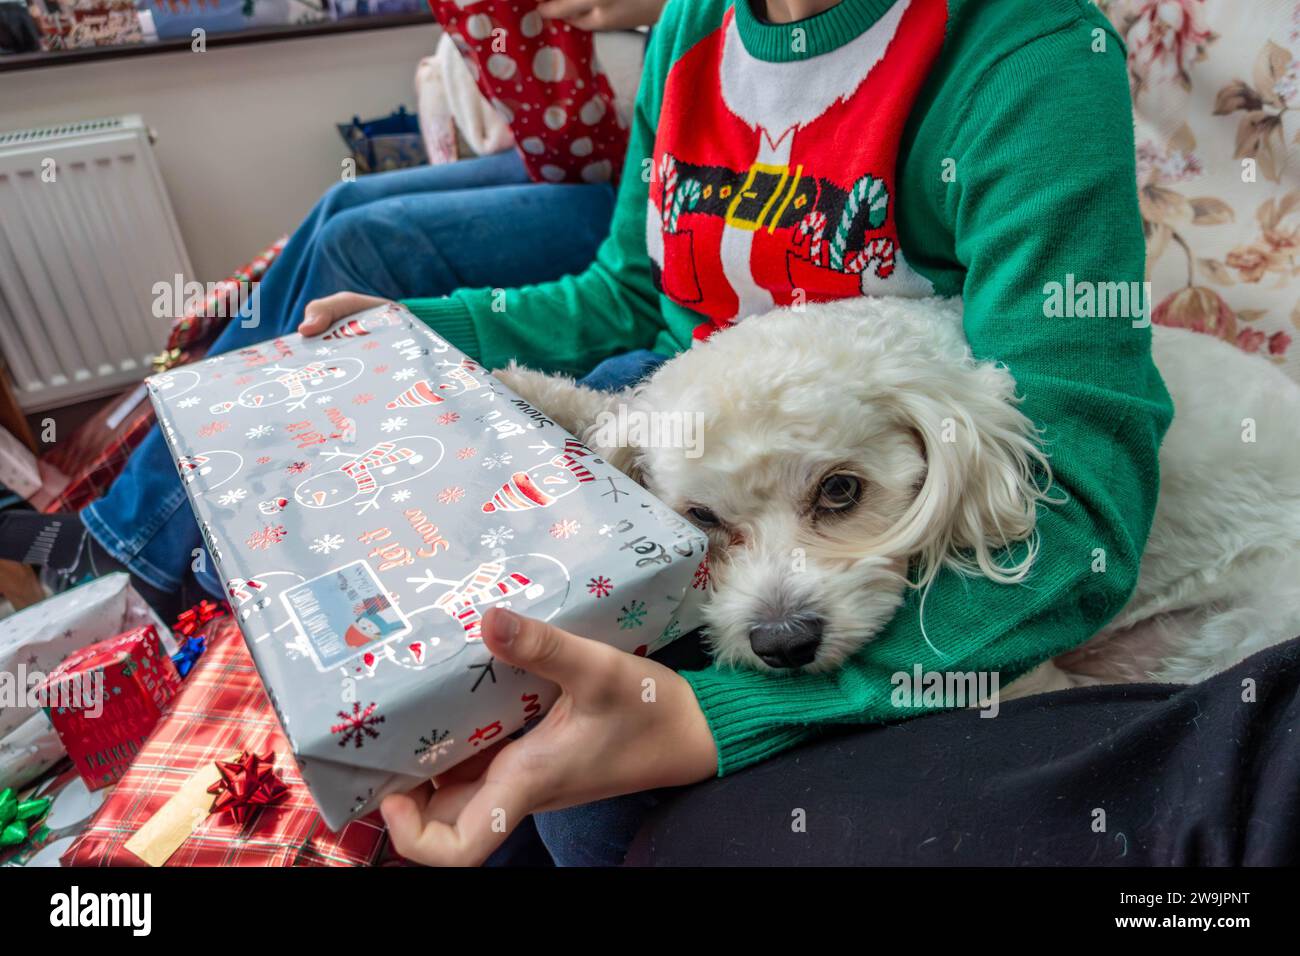 A child wearing a Christmas jumper holds a Christmas present while cuddling a small, white cavapoo dog. Stock Photo